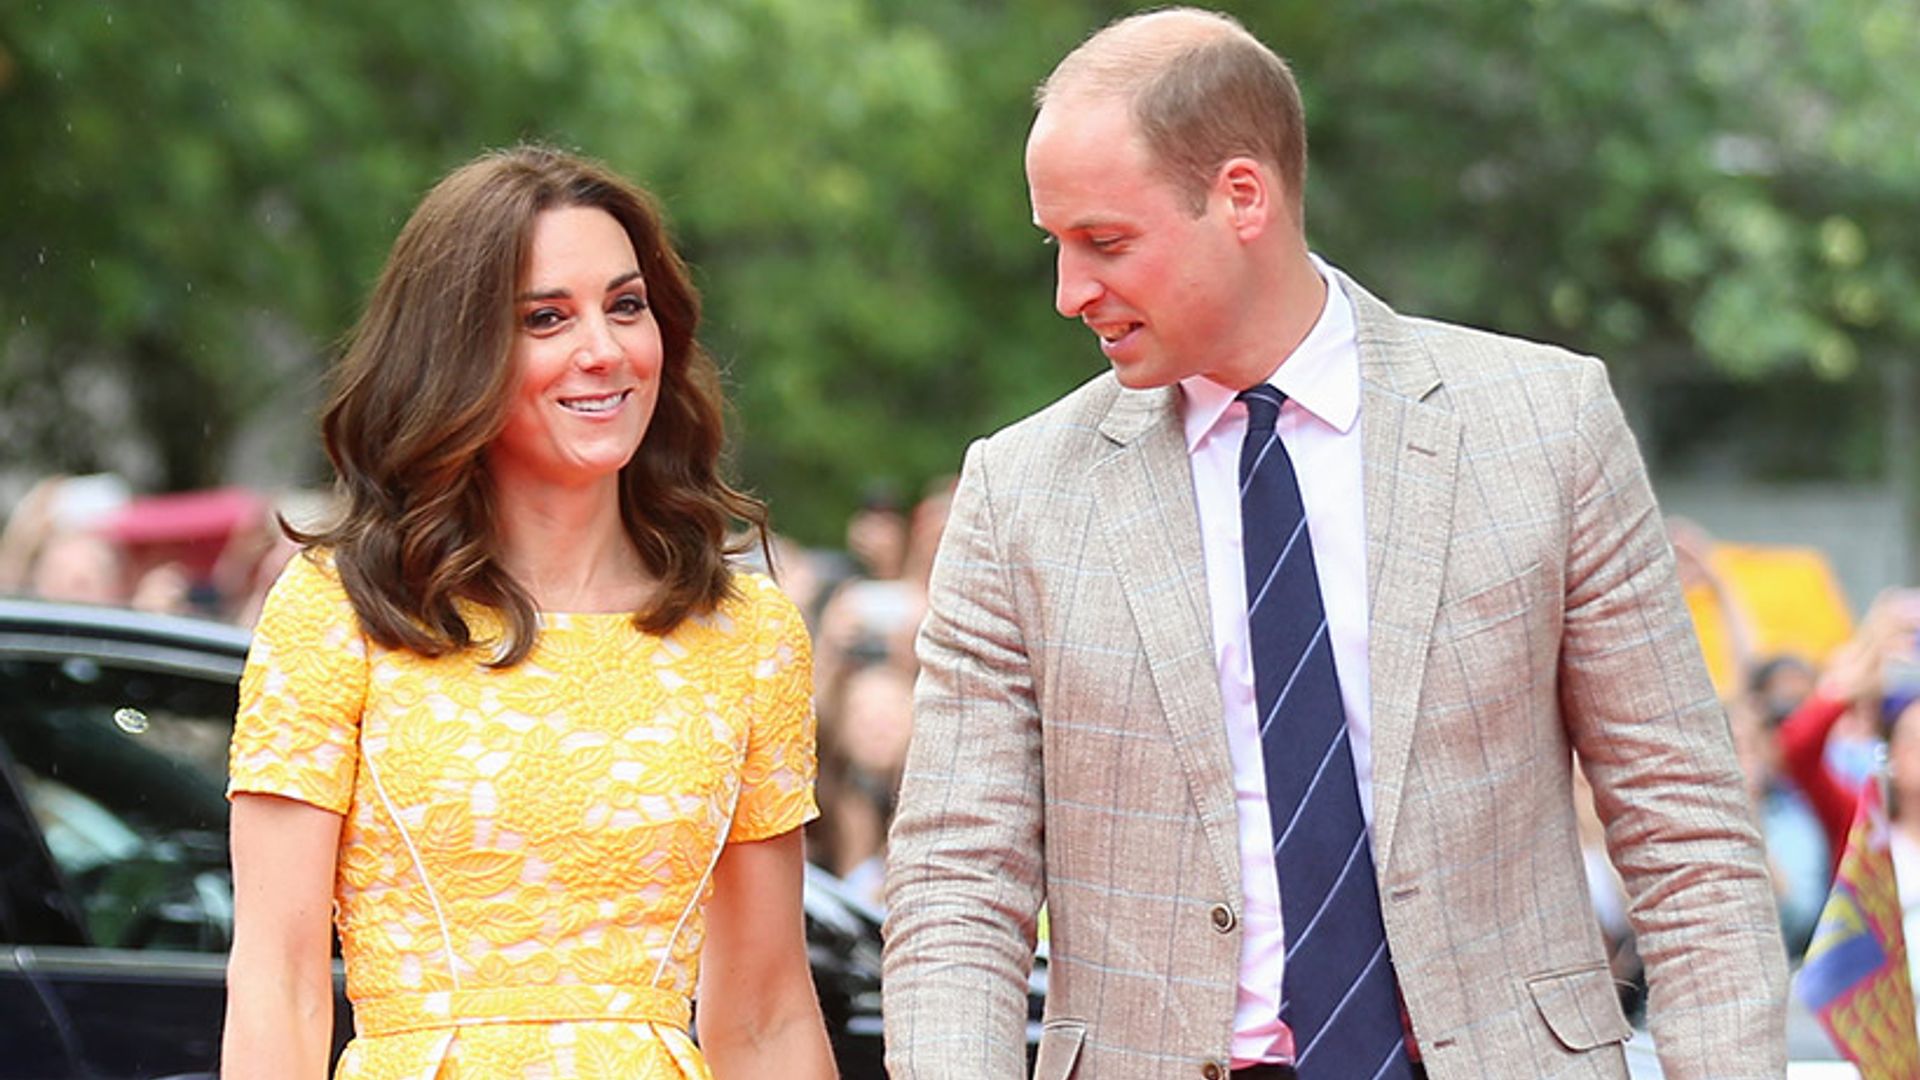 Kate is a vision in yellow Jenny Packham dress on day 4 of royal tour